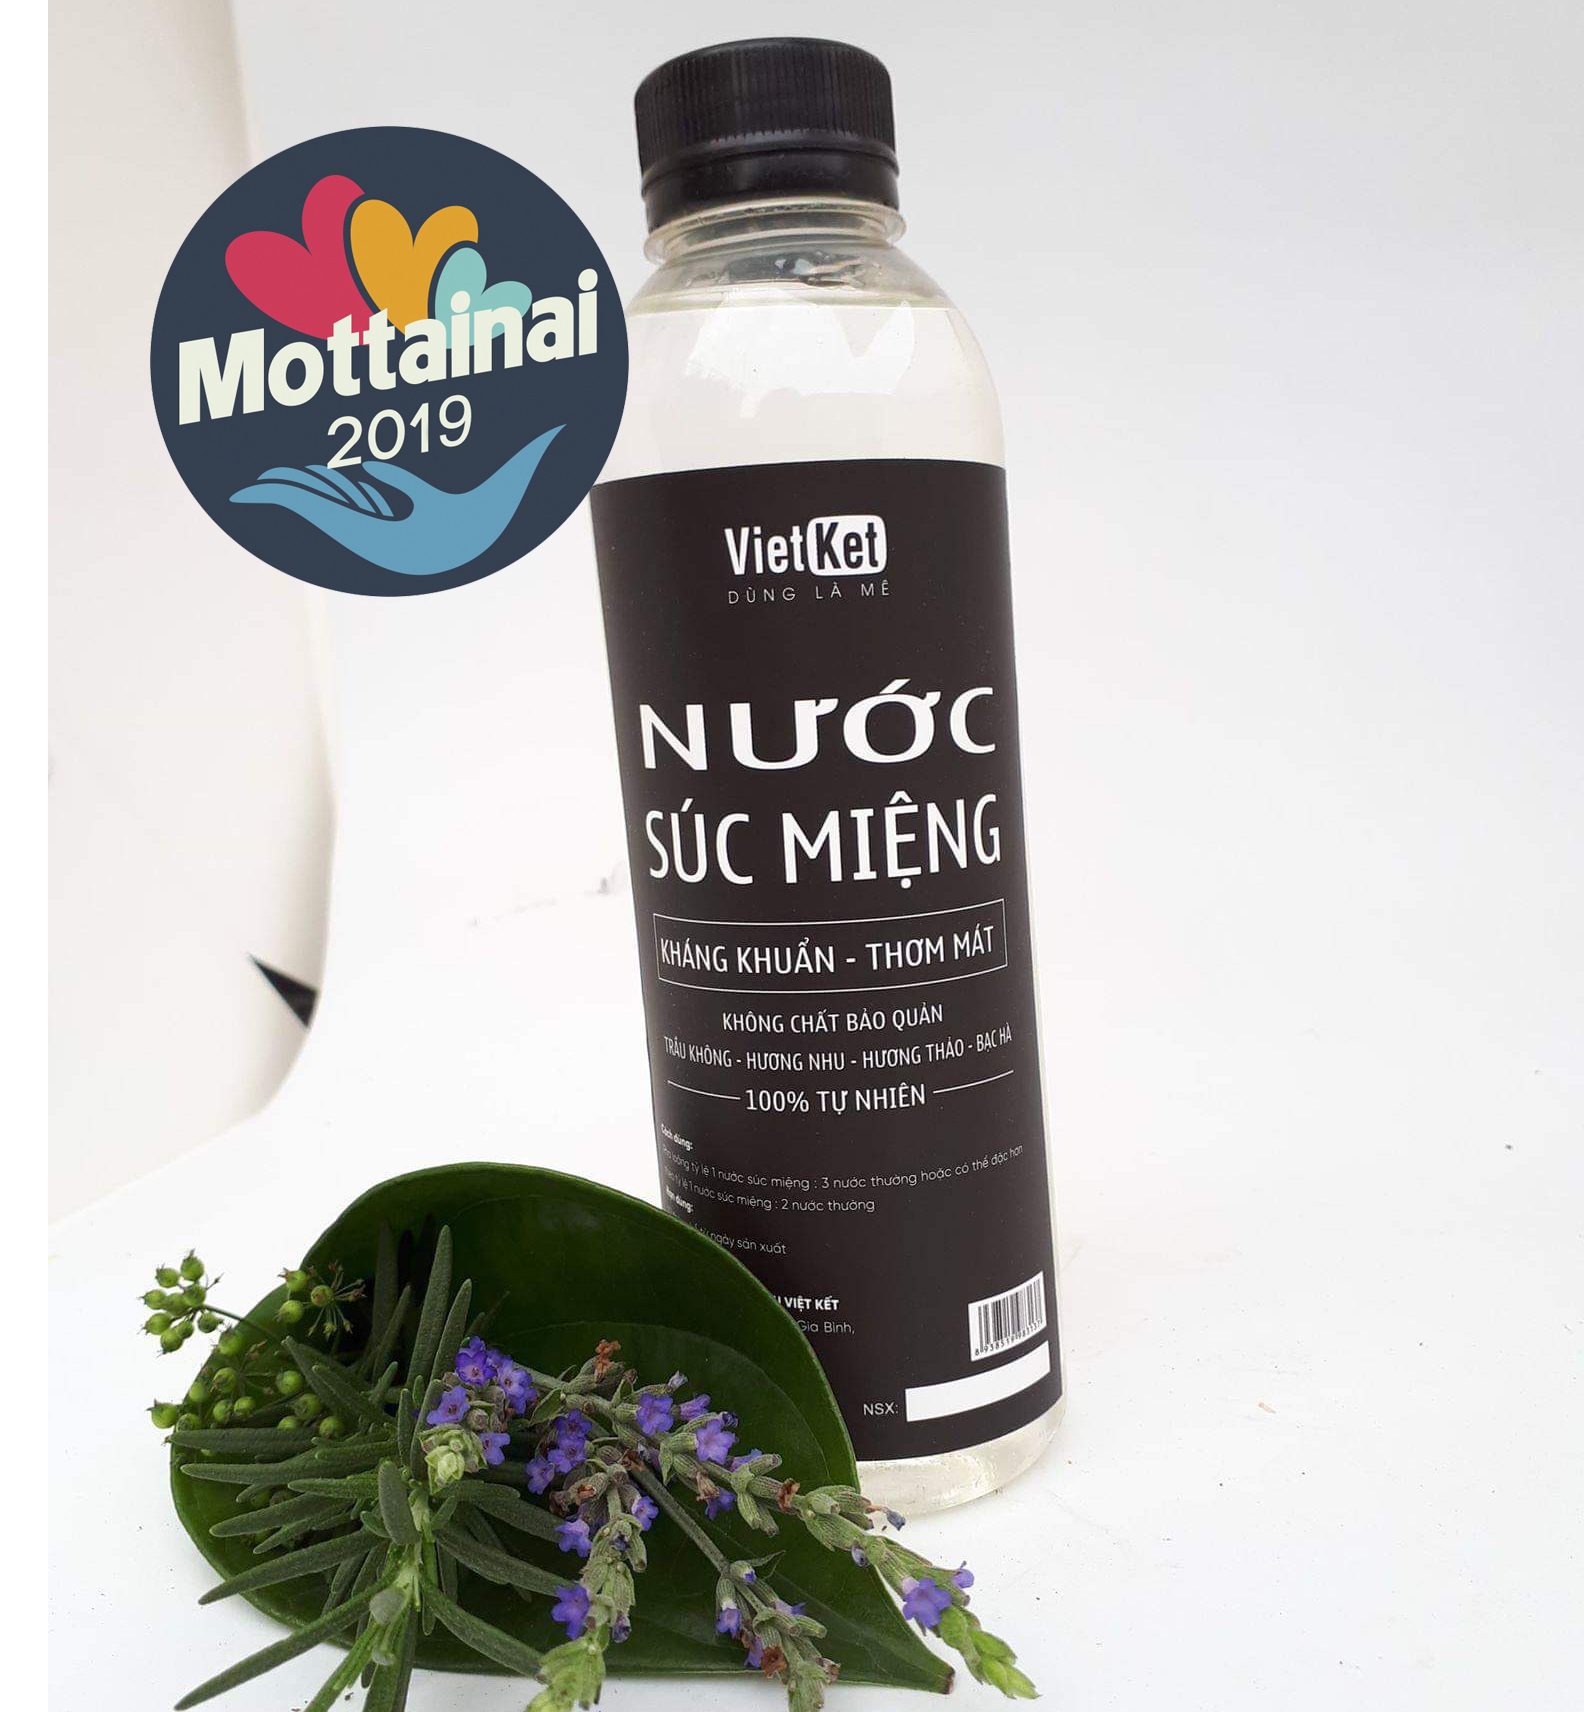 nuoc-suc-mieng.jpg